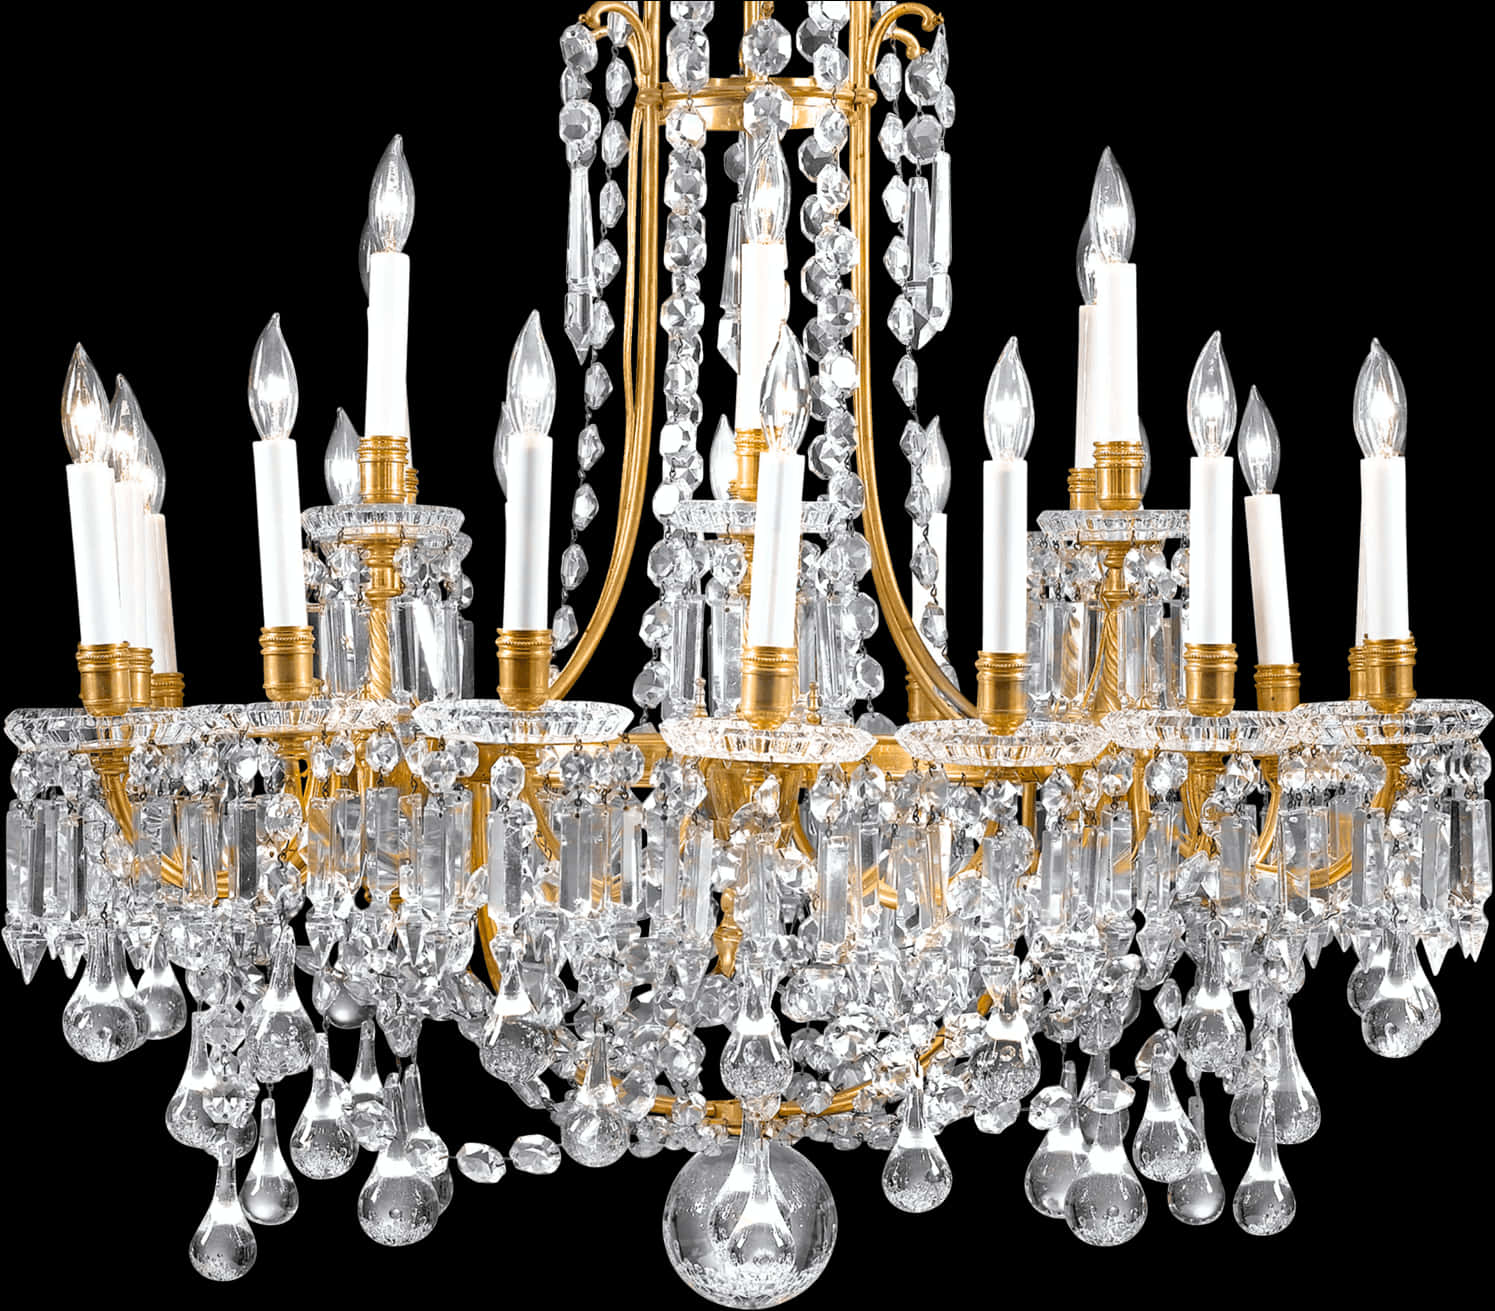 A Chandelier With Many Candles